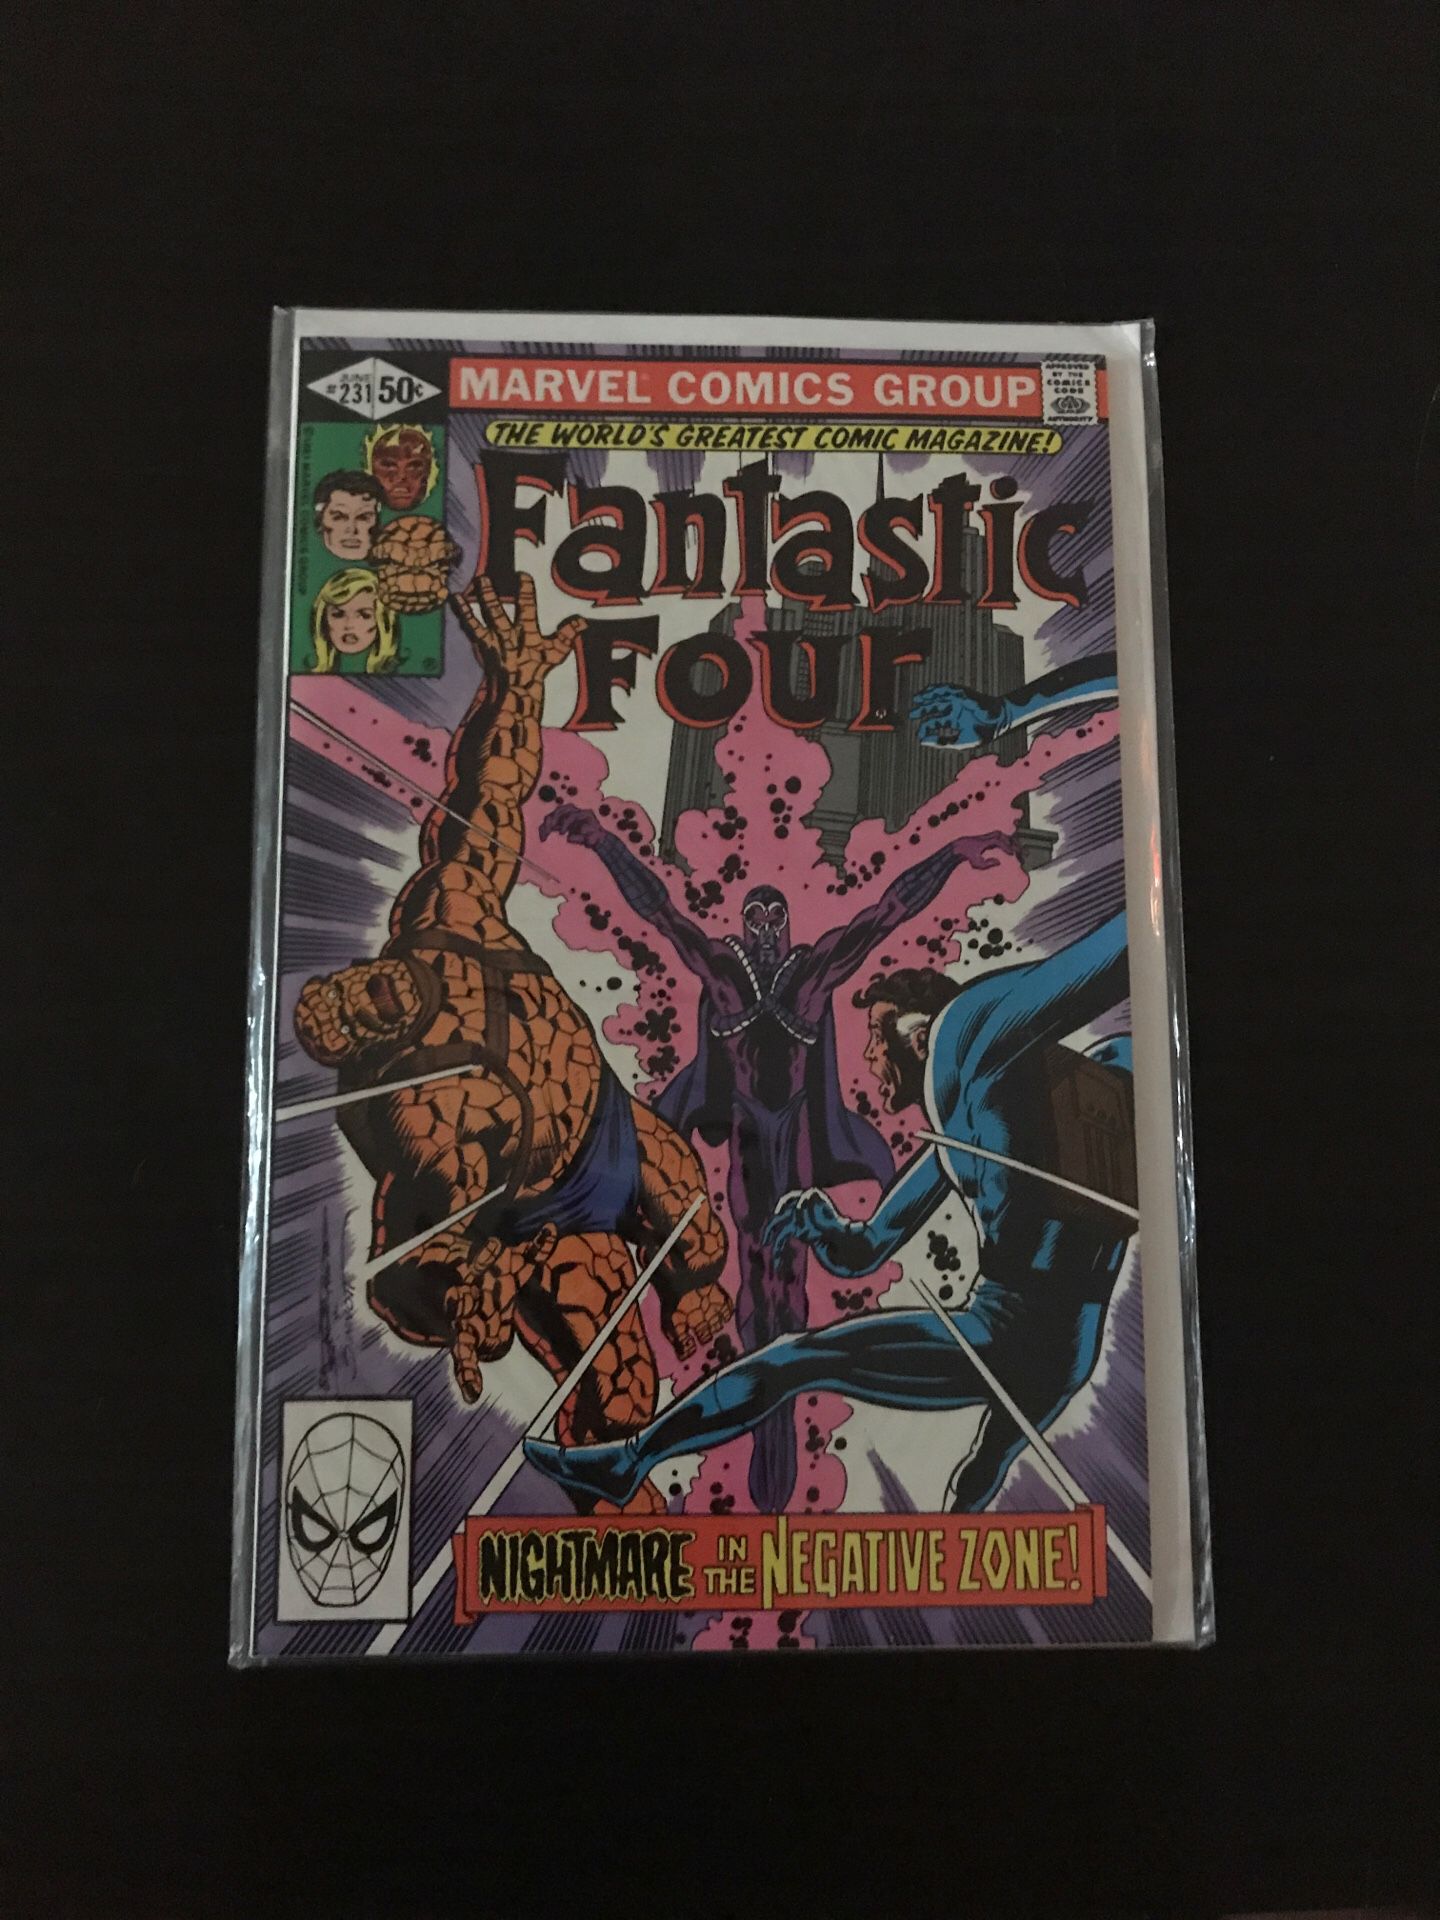 Fantastic Four Nightmare in the negative zone! 1981 issue 231